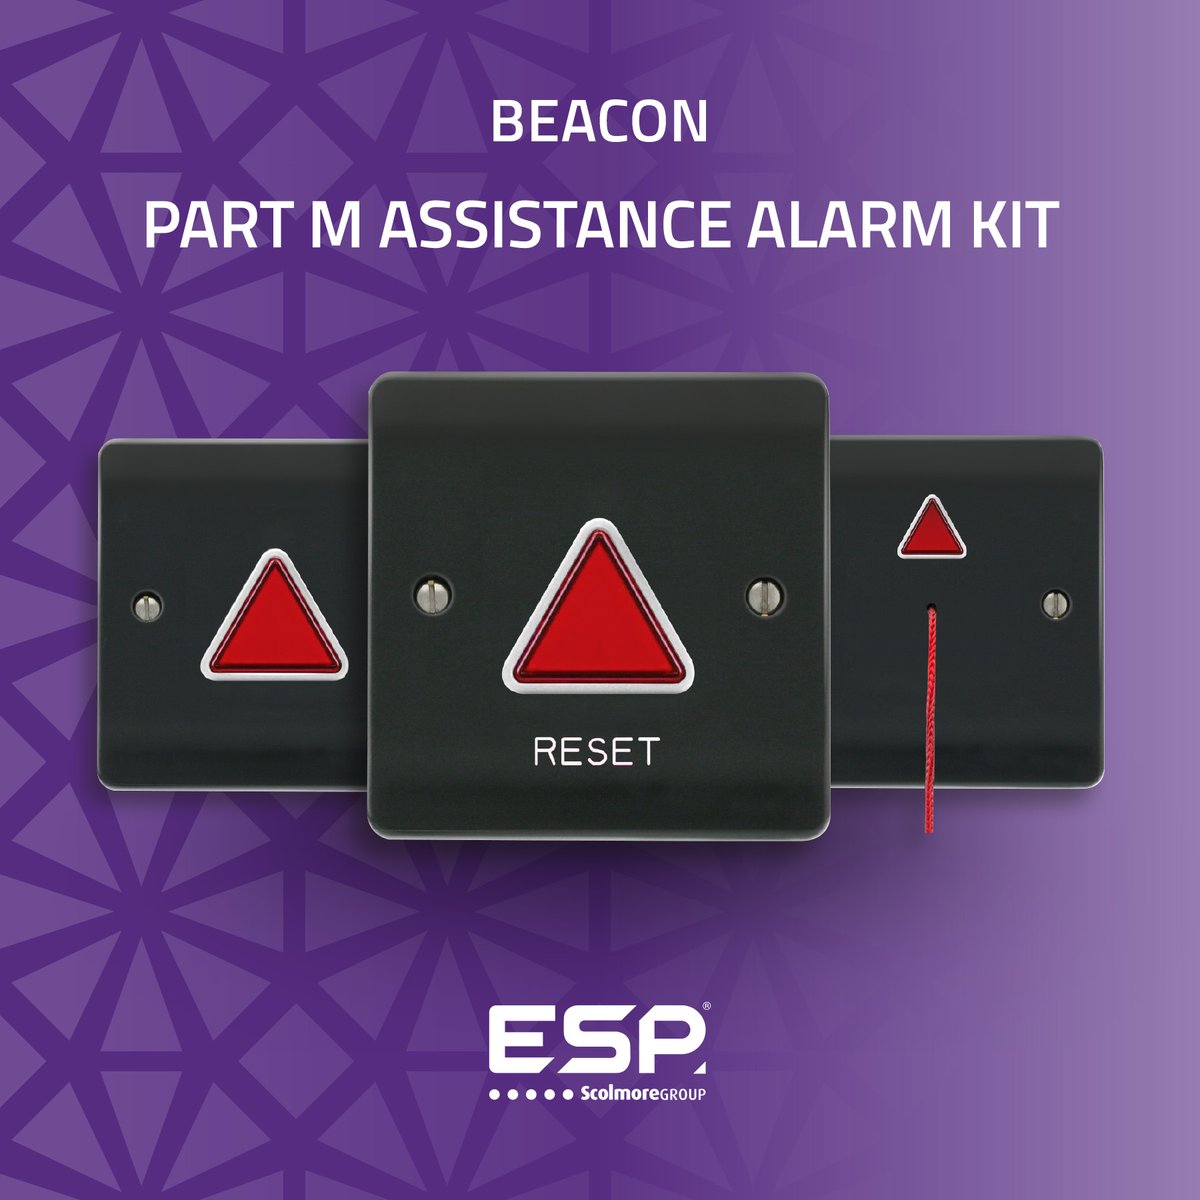 🎉 Introducing the new Part M version of our #Beacon Assistance Alarm kit, designed to meet BS 8300 standards. Find out more 🚨 espuk.com/news/esp-expan… #Accessibility #Safety #ESP #DisabilityAccess